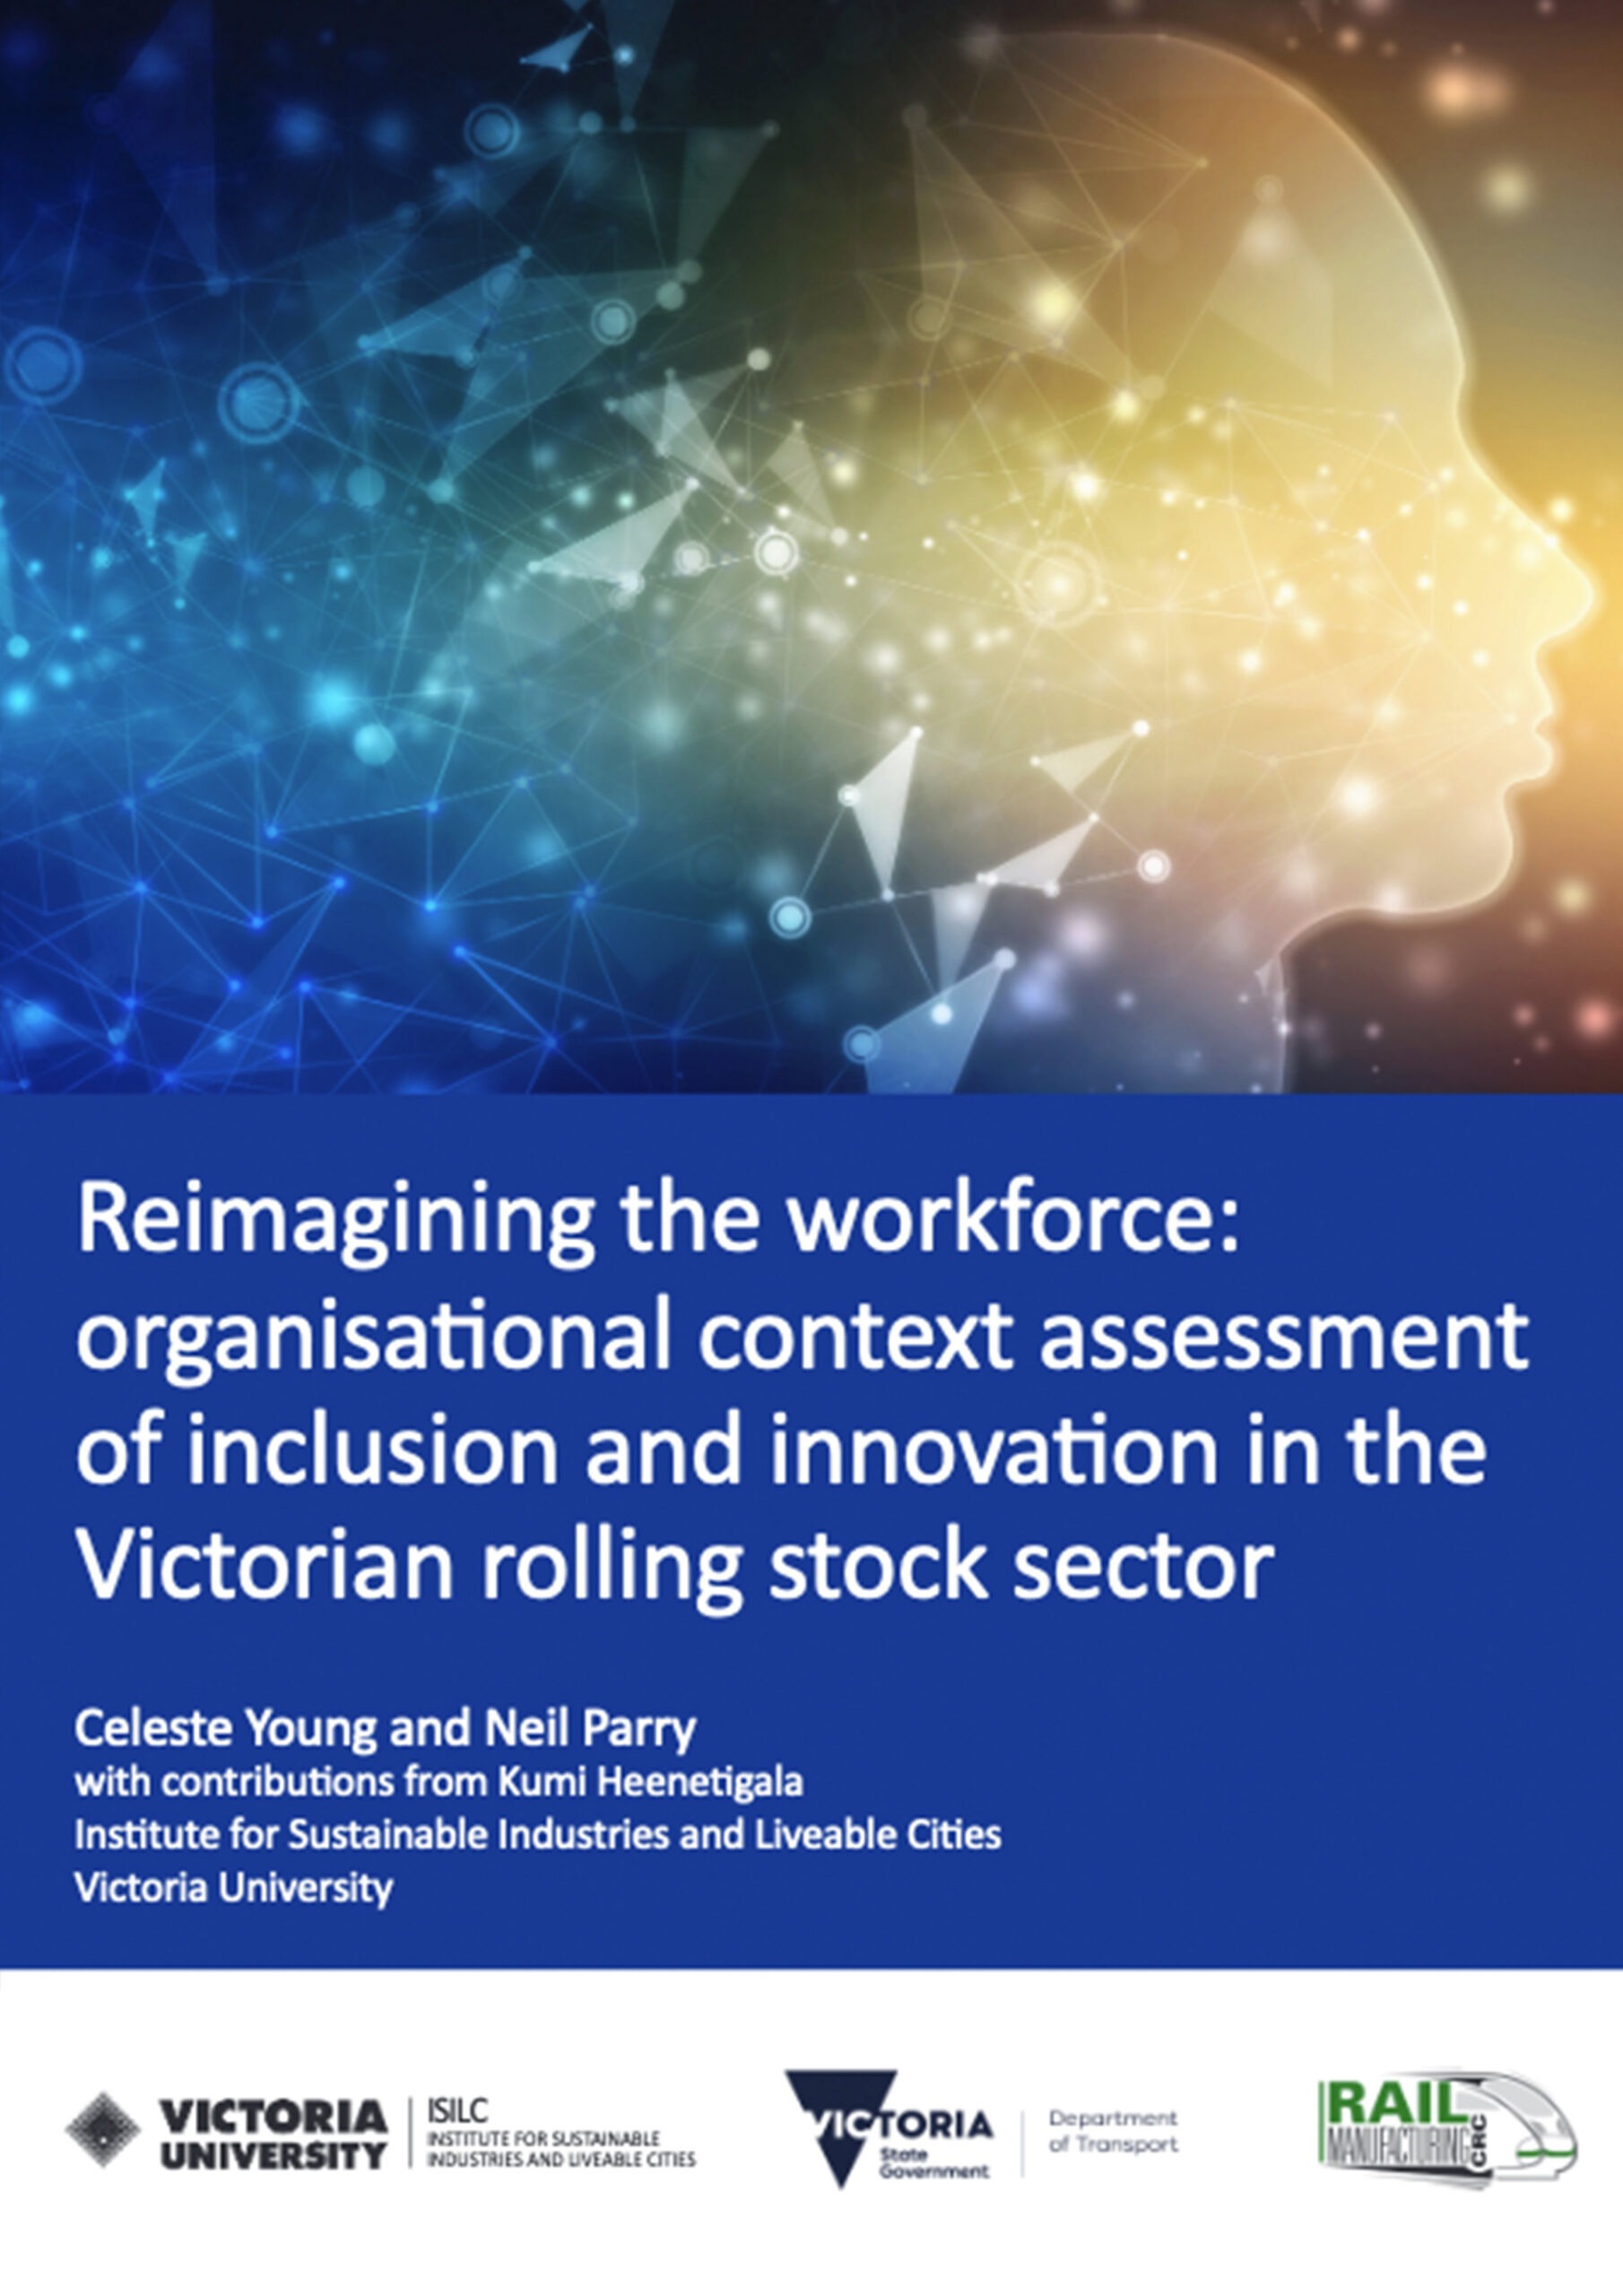 Organisational context assessment of inclusion and innovation in the Victorian rolling stock sector